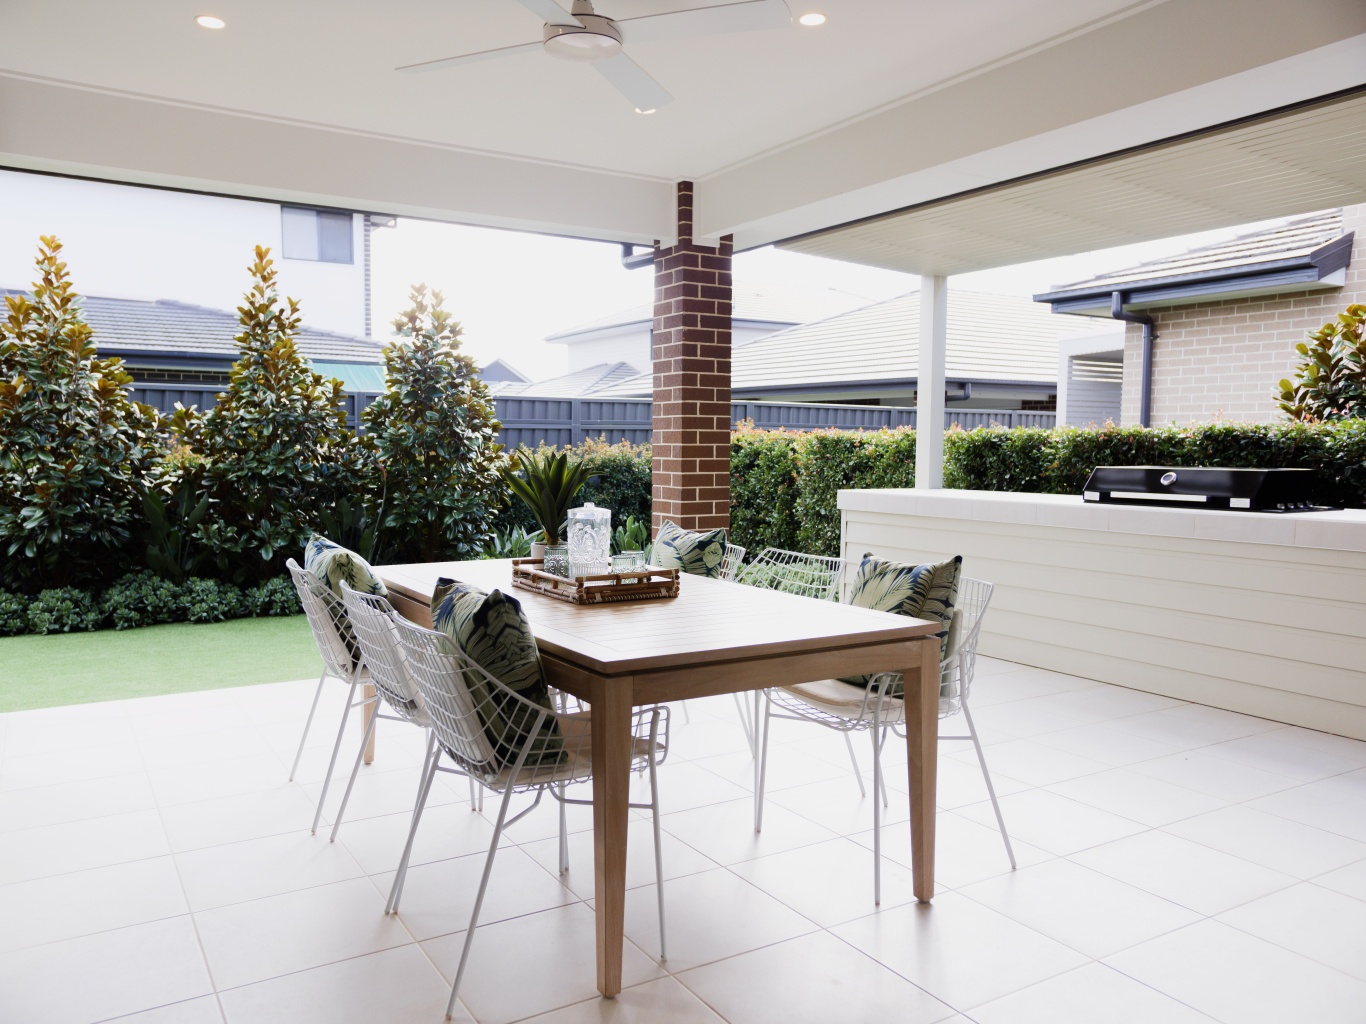 House & Land Packages Sydney & NSW | Domaine Homes